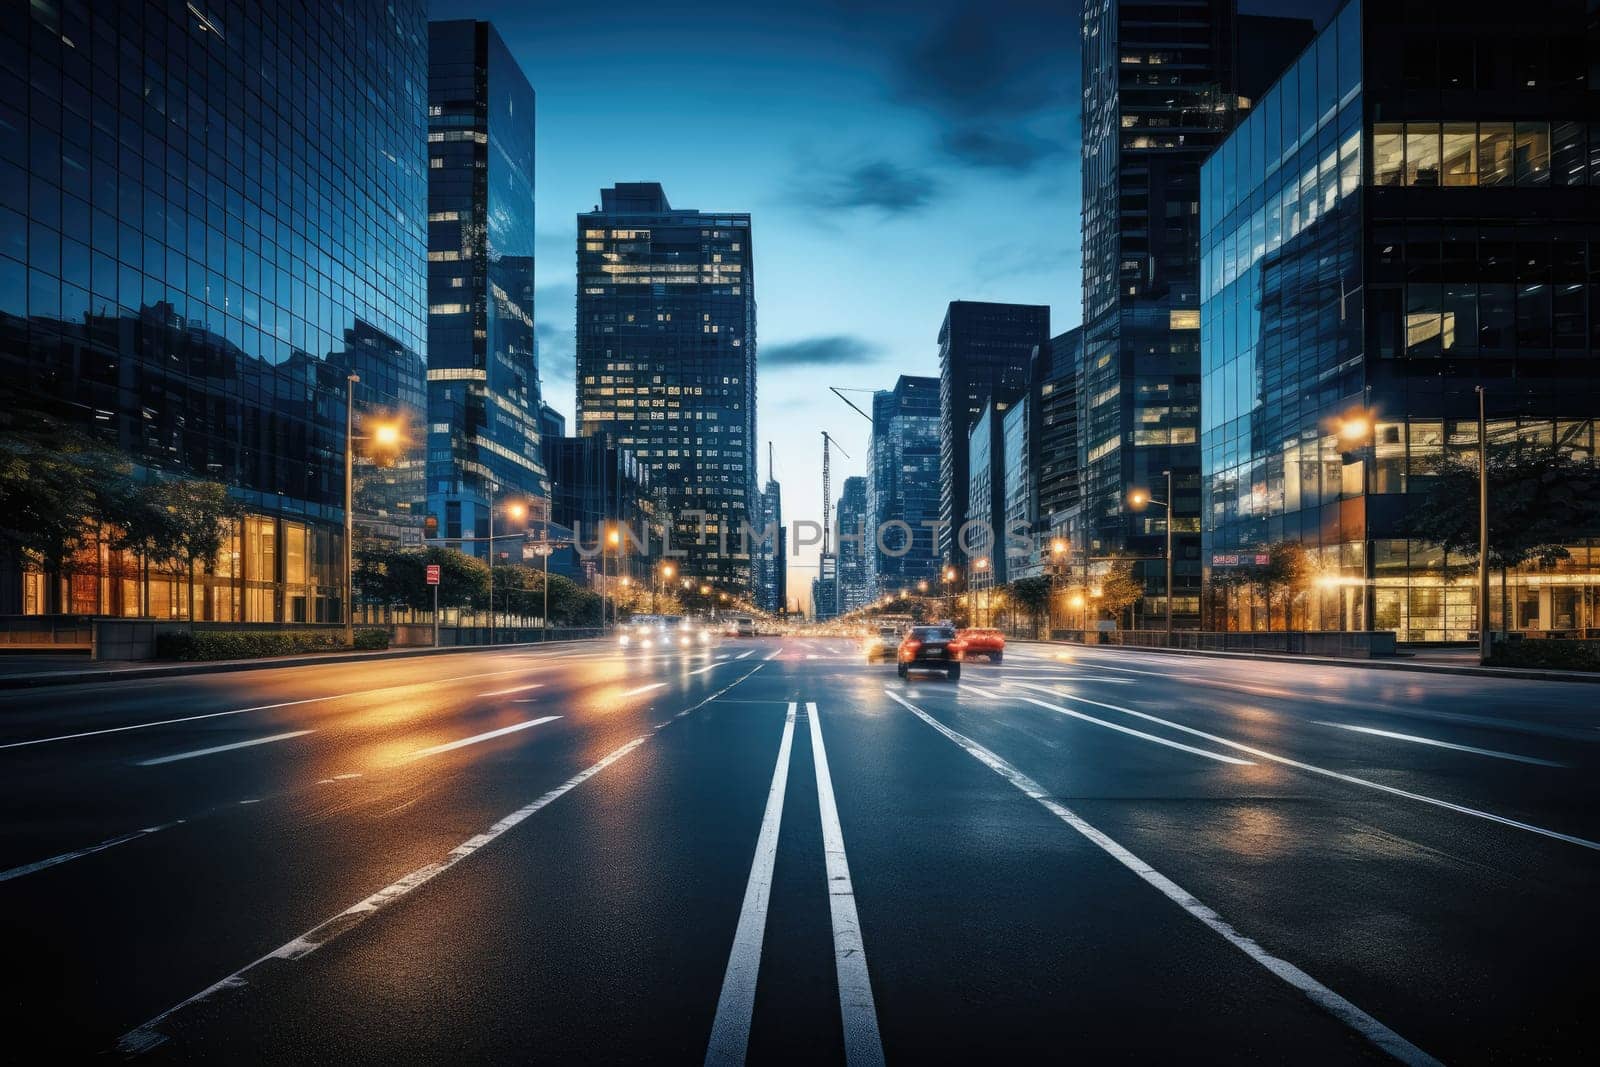 Dusk lights in modern city street scene Blurry image of a near-dark road Bright lights, tall buildings, towers, skyscrapers, roads, cars. by Generative AI by wichayada